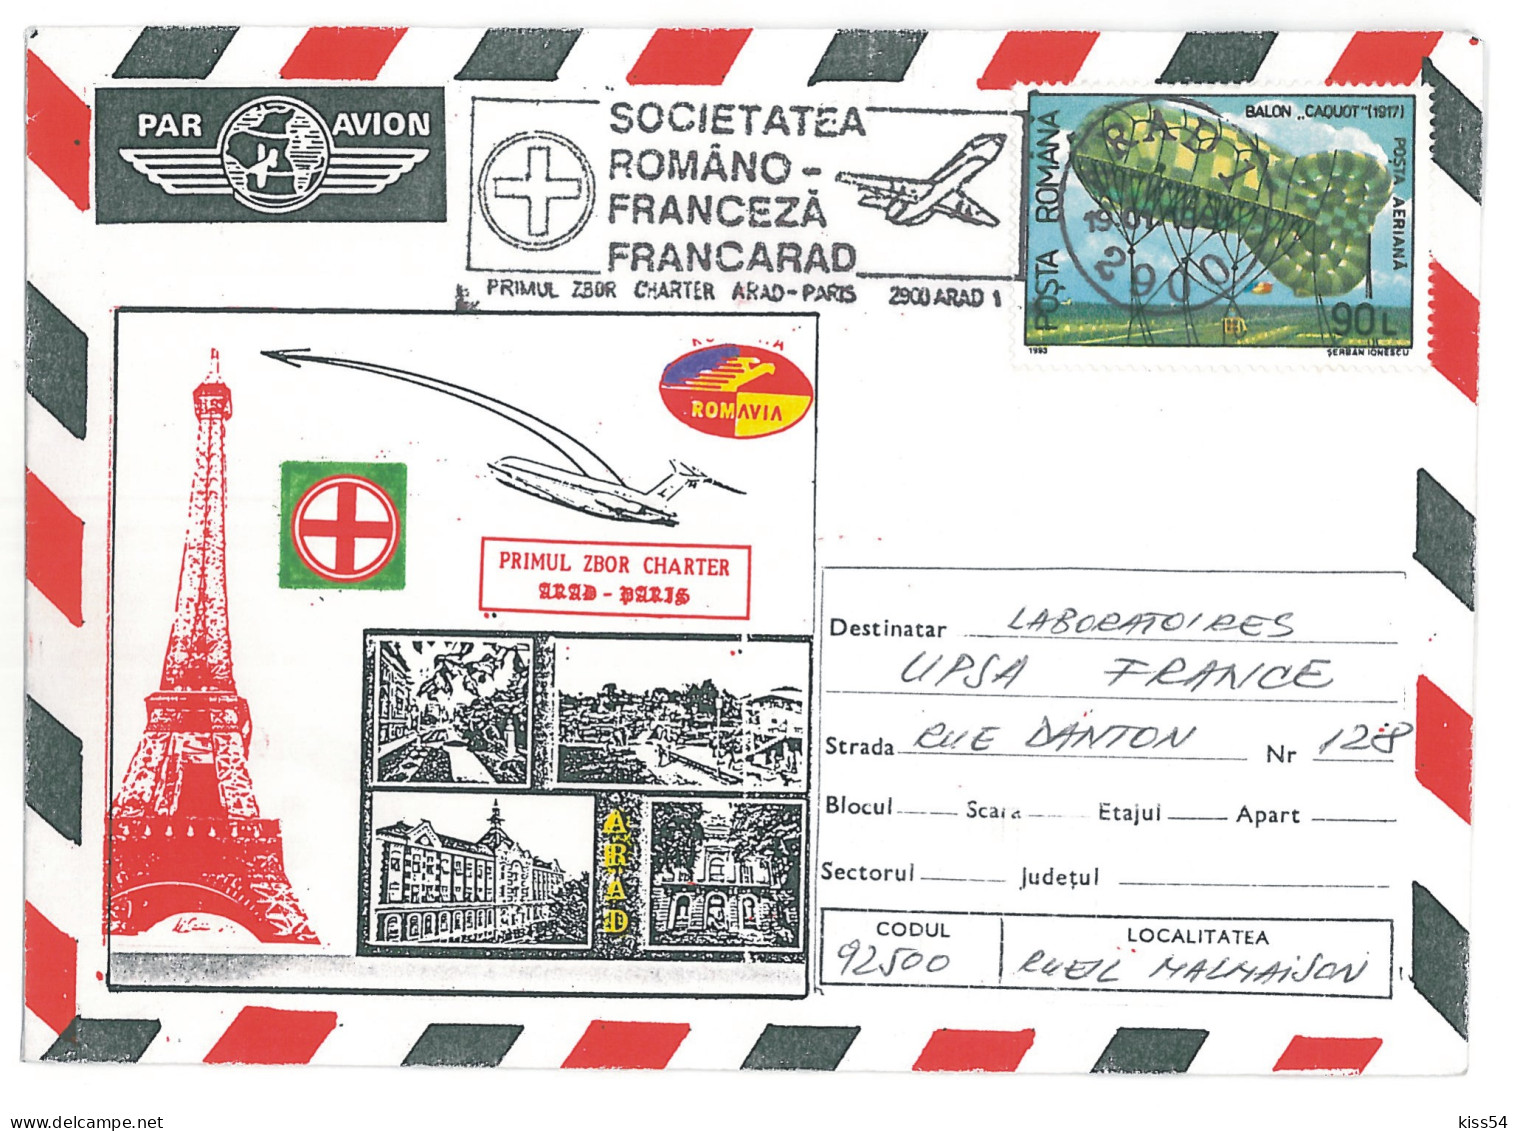 COV 35 - 227-a AIRPLANE, Romania-France - Cover - Used - 1994 - Covers & Documents